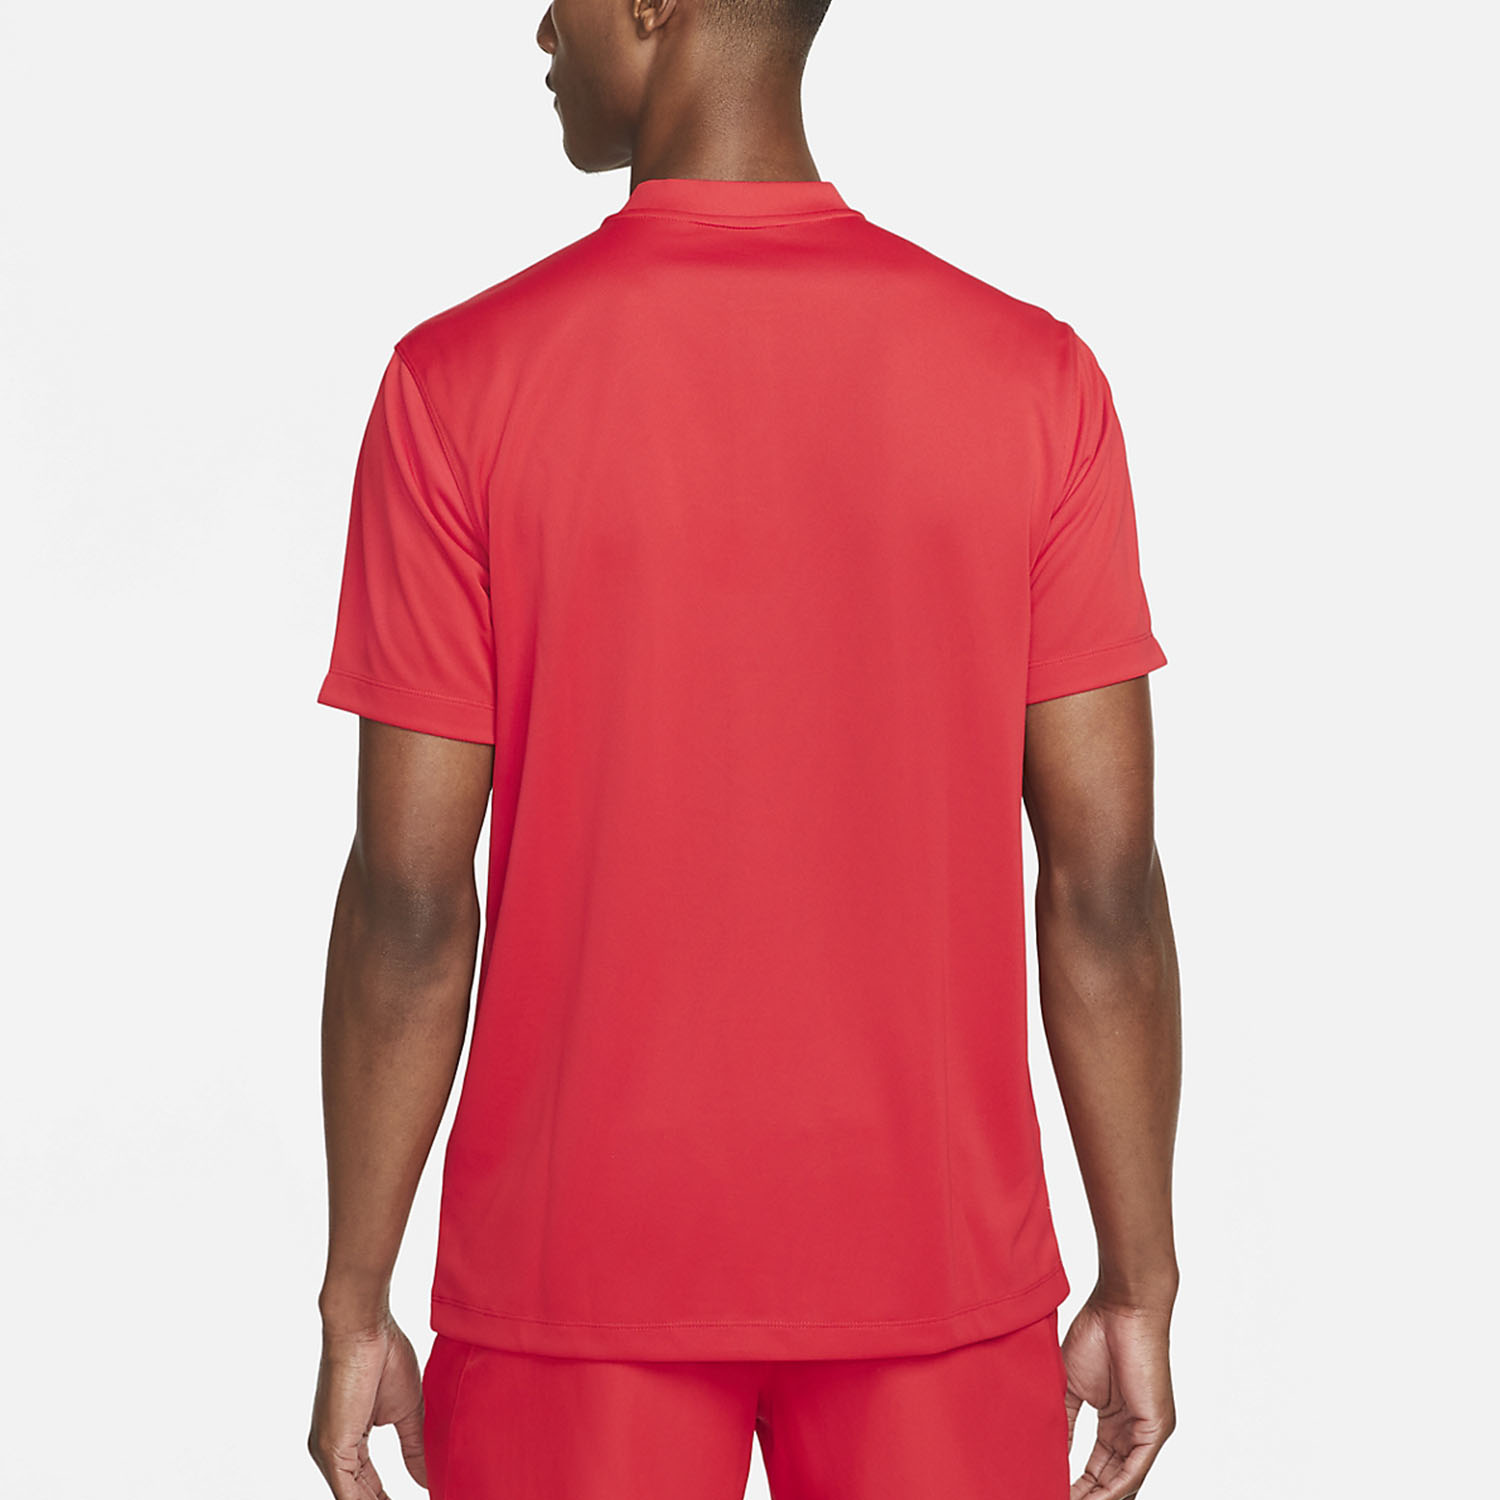 Nike Dri-FIT Blade Solid Men's Tennis Polo - University Red